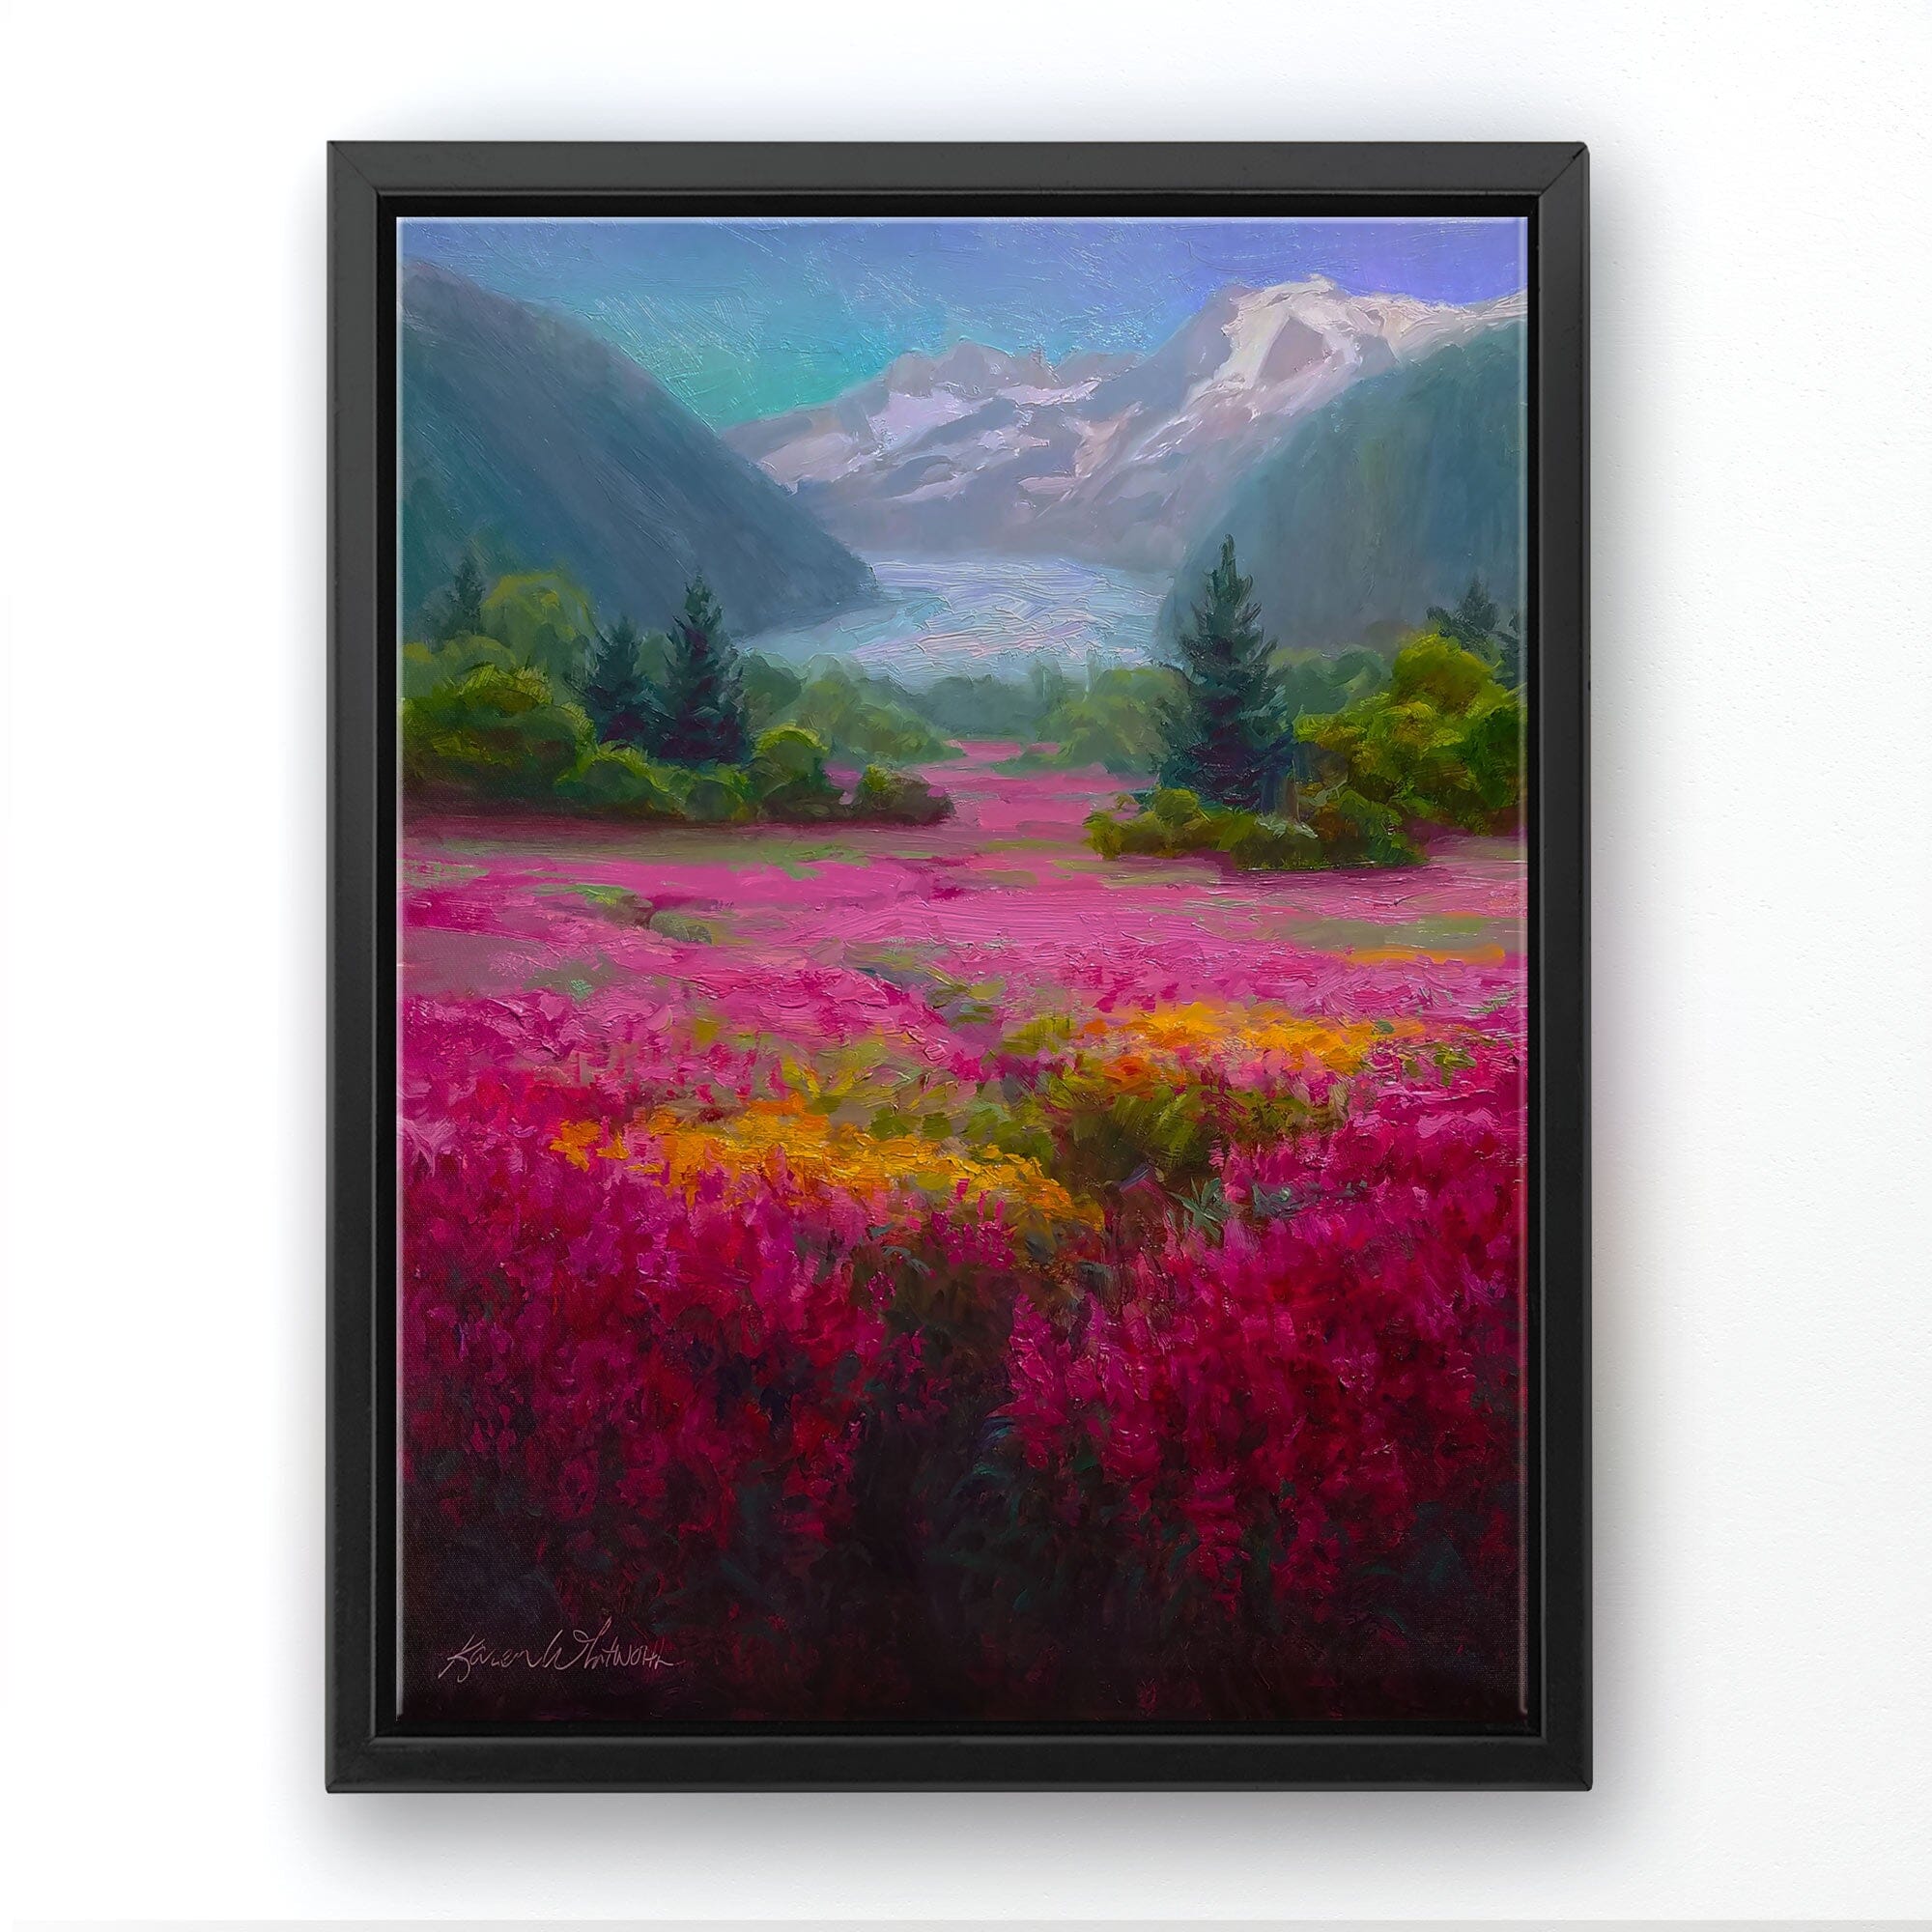 Alaska Art landscape painting on canvas of Mendenhall Glacier scenery in Juneau Alaska in a black frame on a white wall.